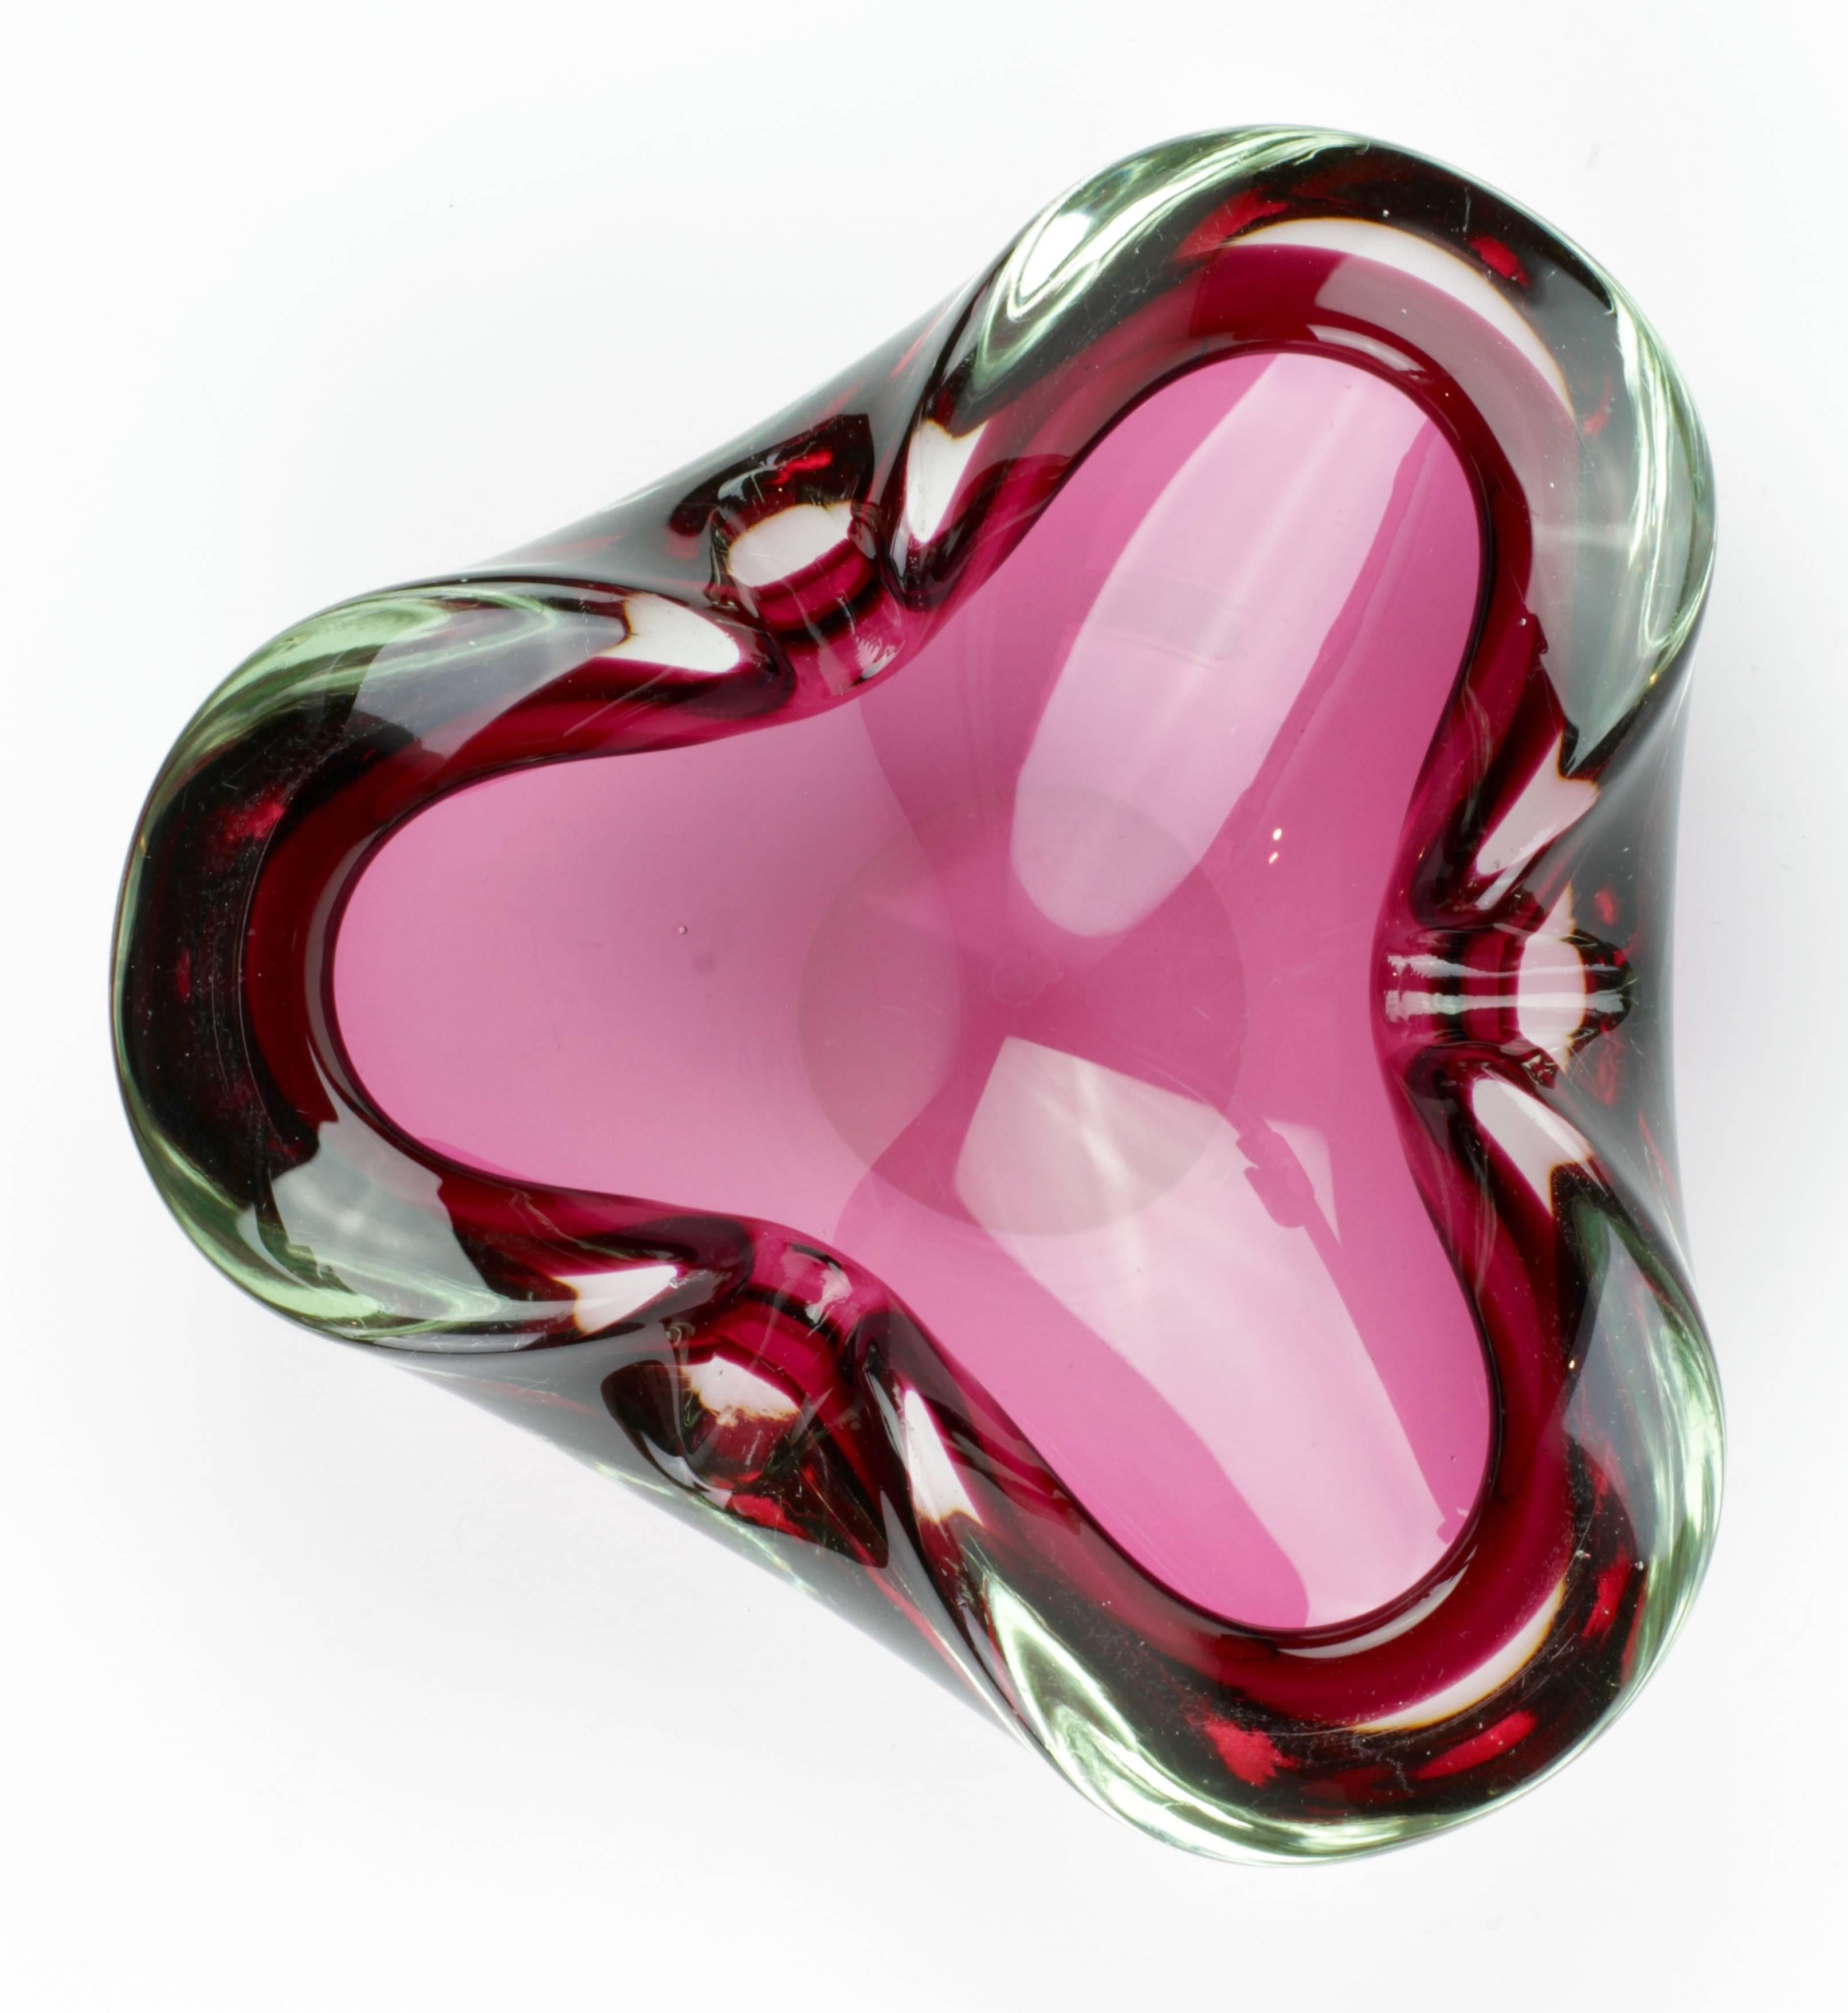 A wonderful pink Murano glass bowl with three folded edges and utilising the Sommerso technique. Would make a very pretty bathroom dish for soap or jewellery bowl.